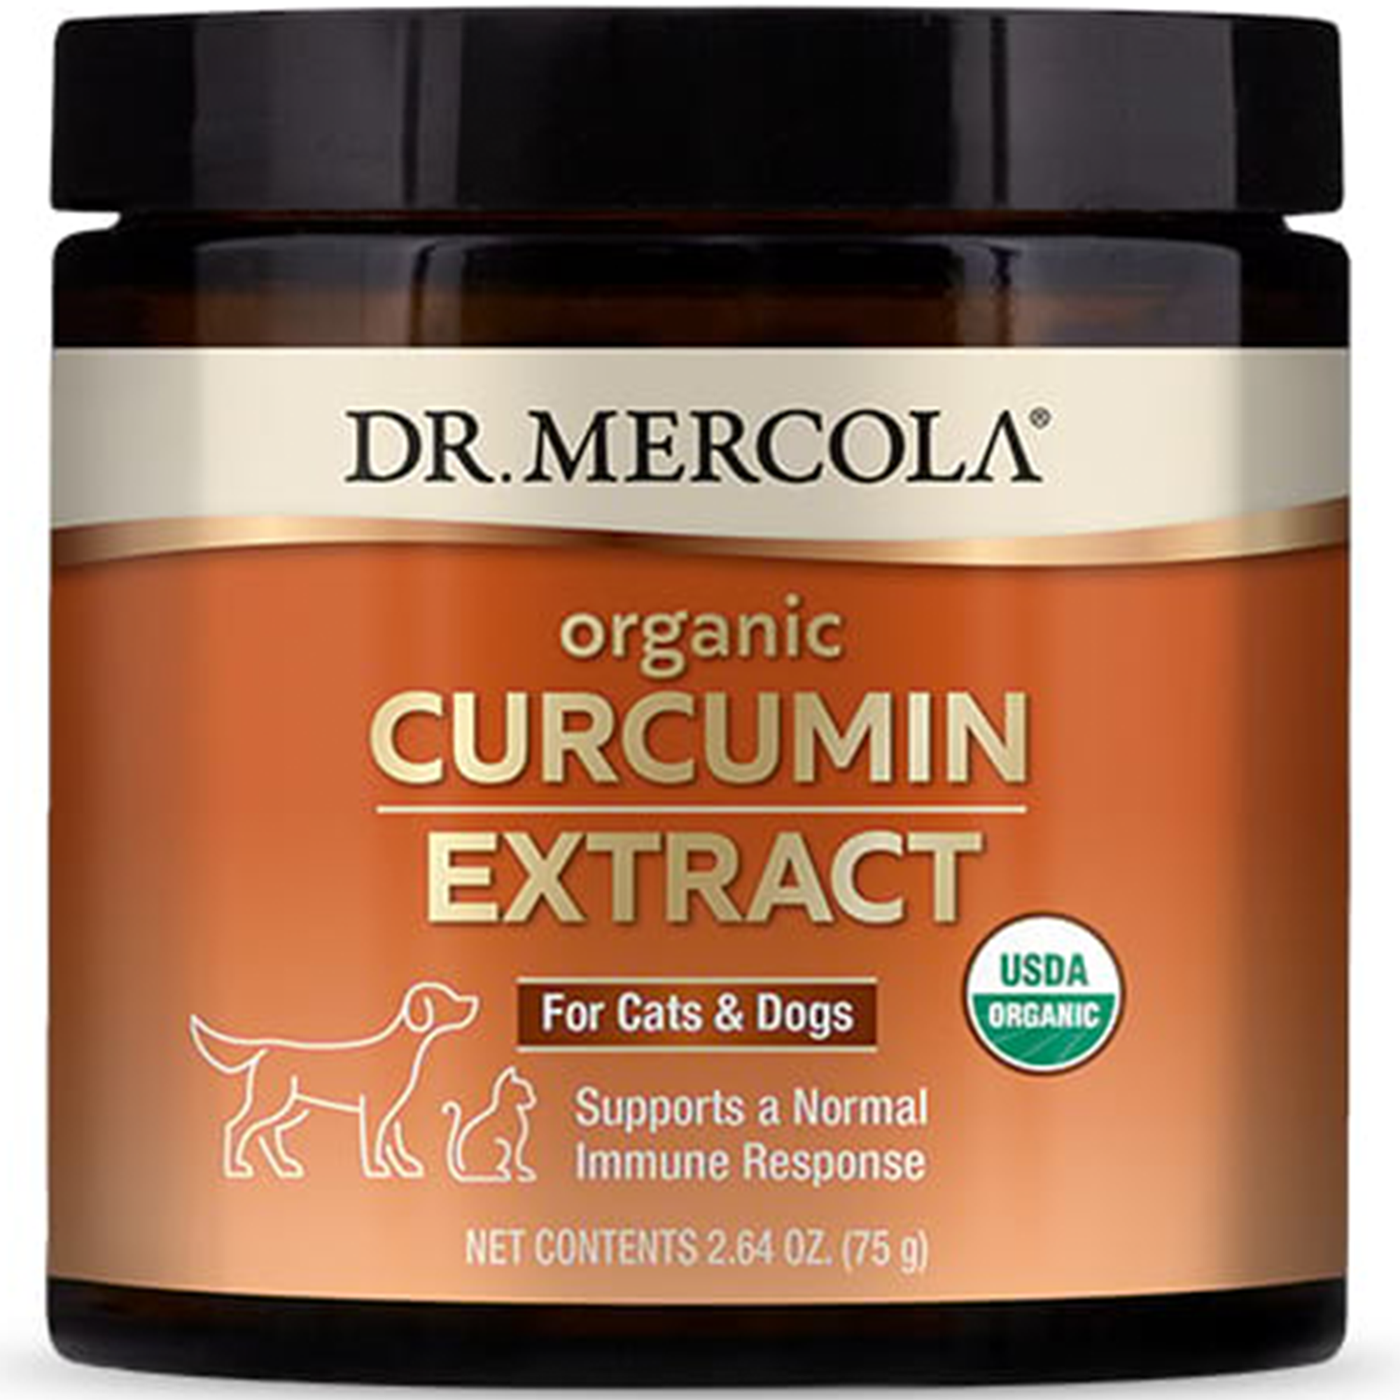 Organic Curcumin Extract for Pets Curated Wellness